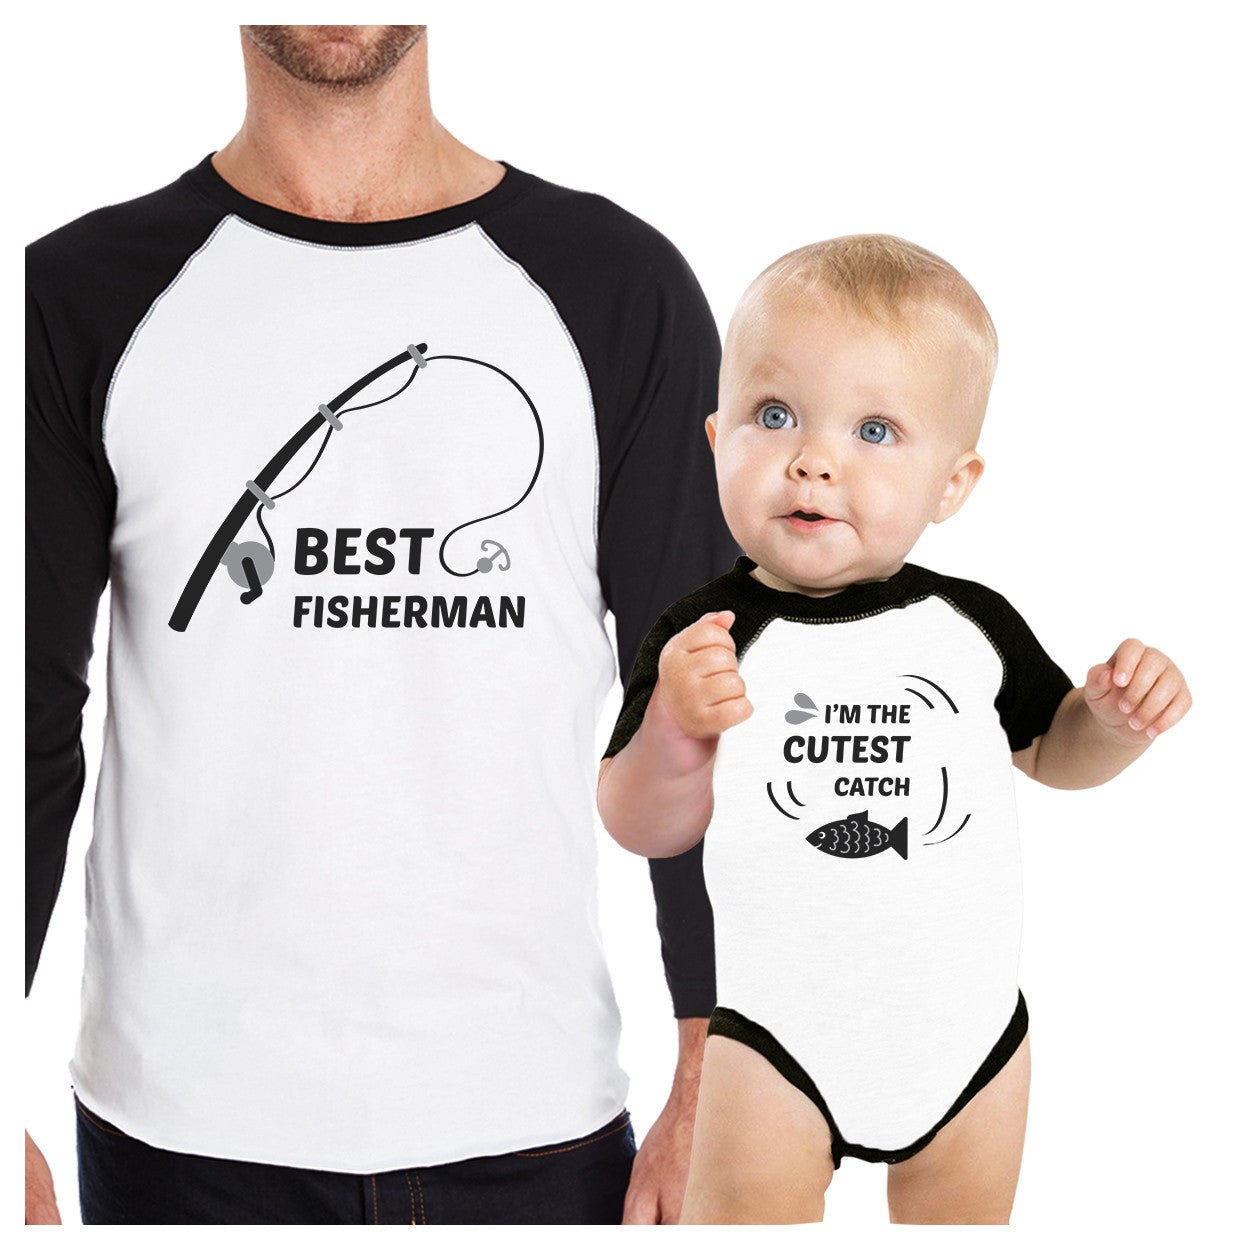 Best Fisherman Cutest Catch Dad and Baby Matching Black And White Baseball Shirts